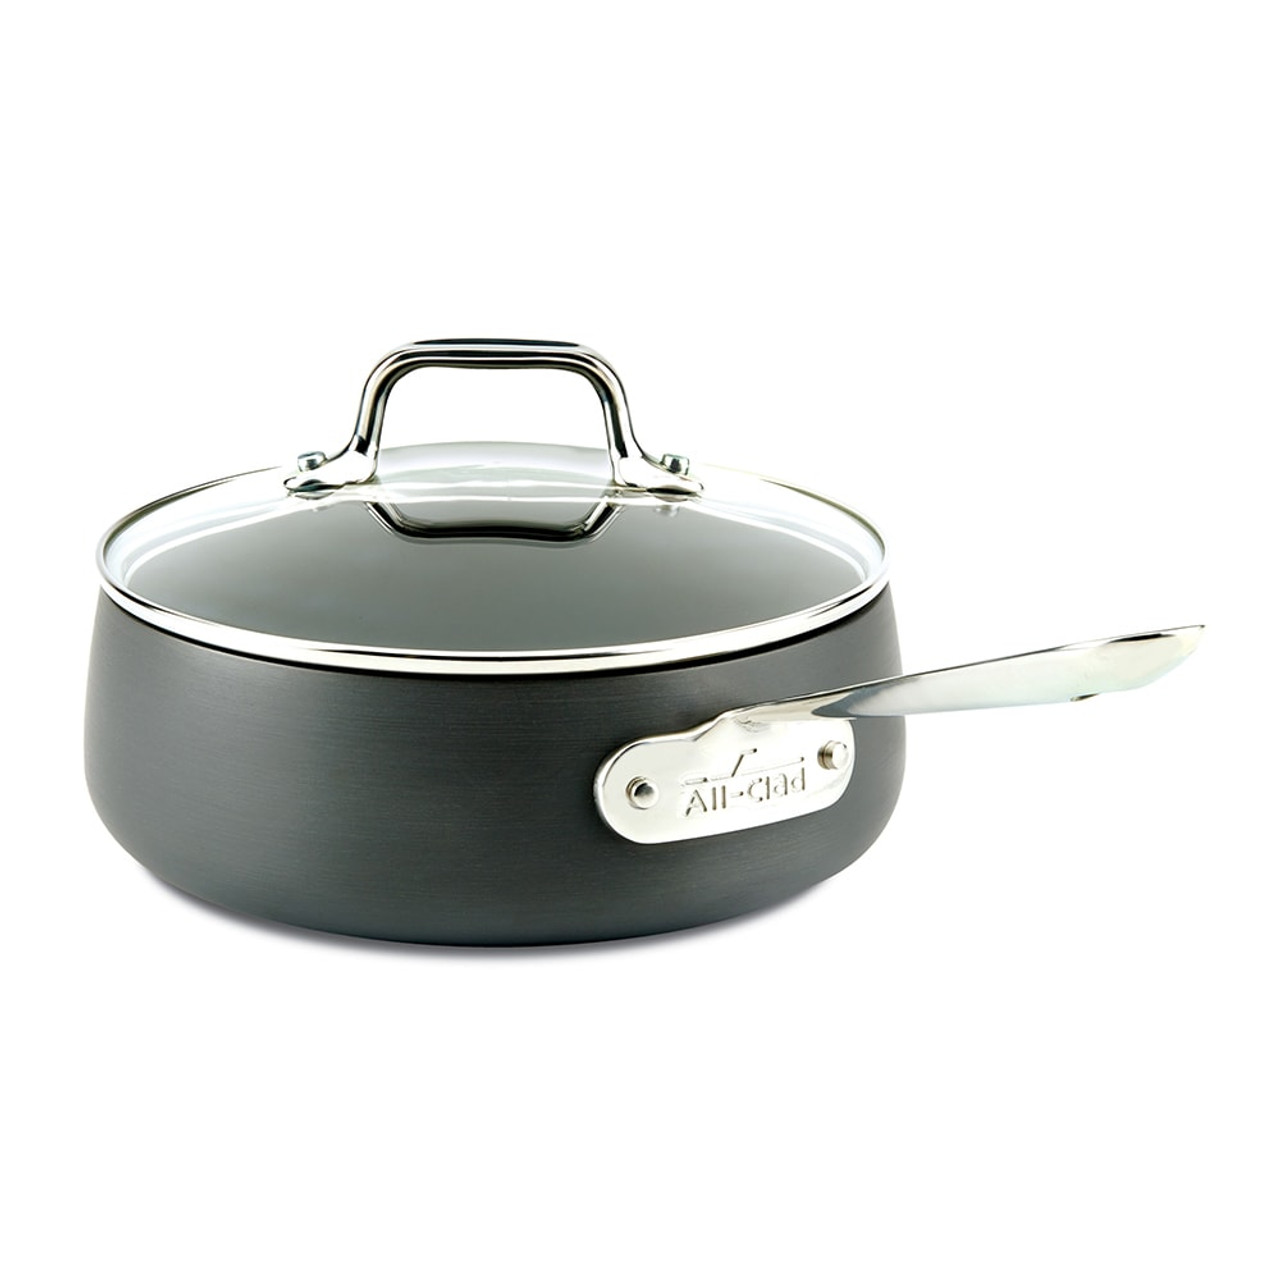 https://cdn11.bigcommerce.com/s-hccytny0od/images/stencil/1280x1280/products/519/8410/all-clad-ha1-sauce-pan-2-5qt__71317.1576080481.jpg?c=2?imbypass=on